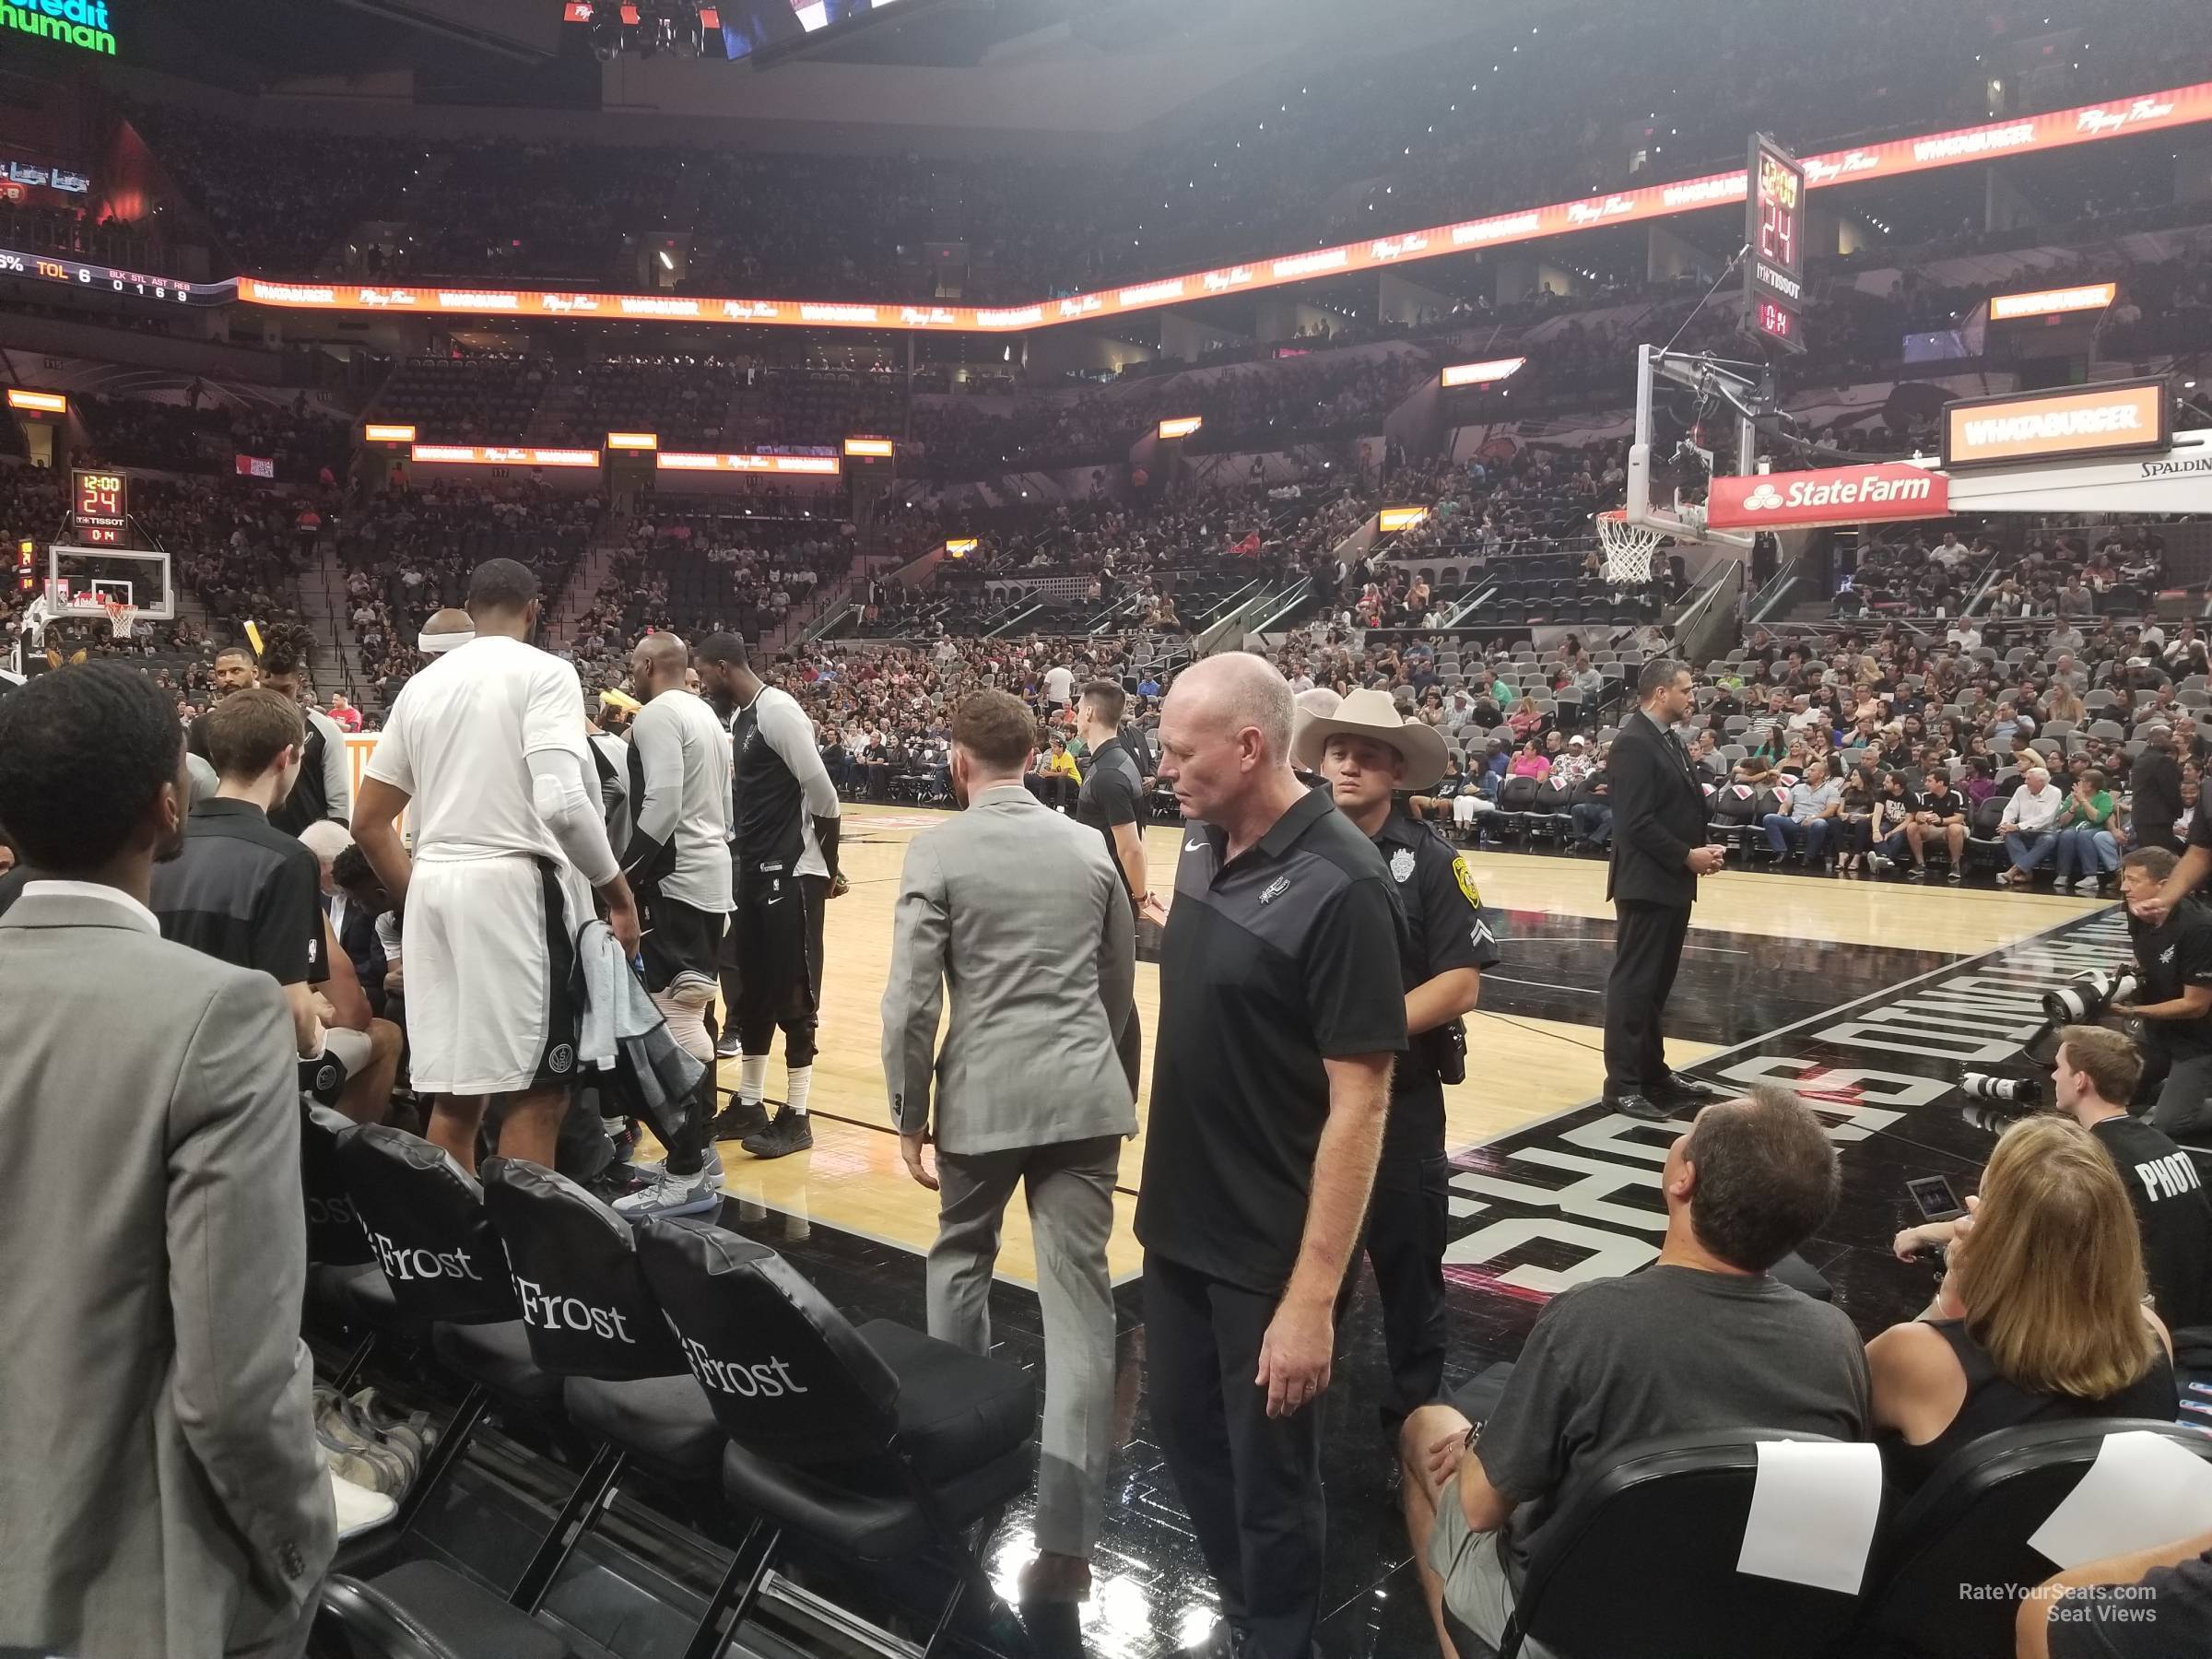 section 2, row 5 seat view  for basketball - at&t center